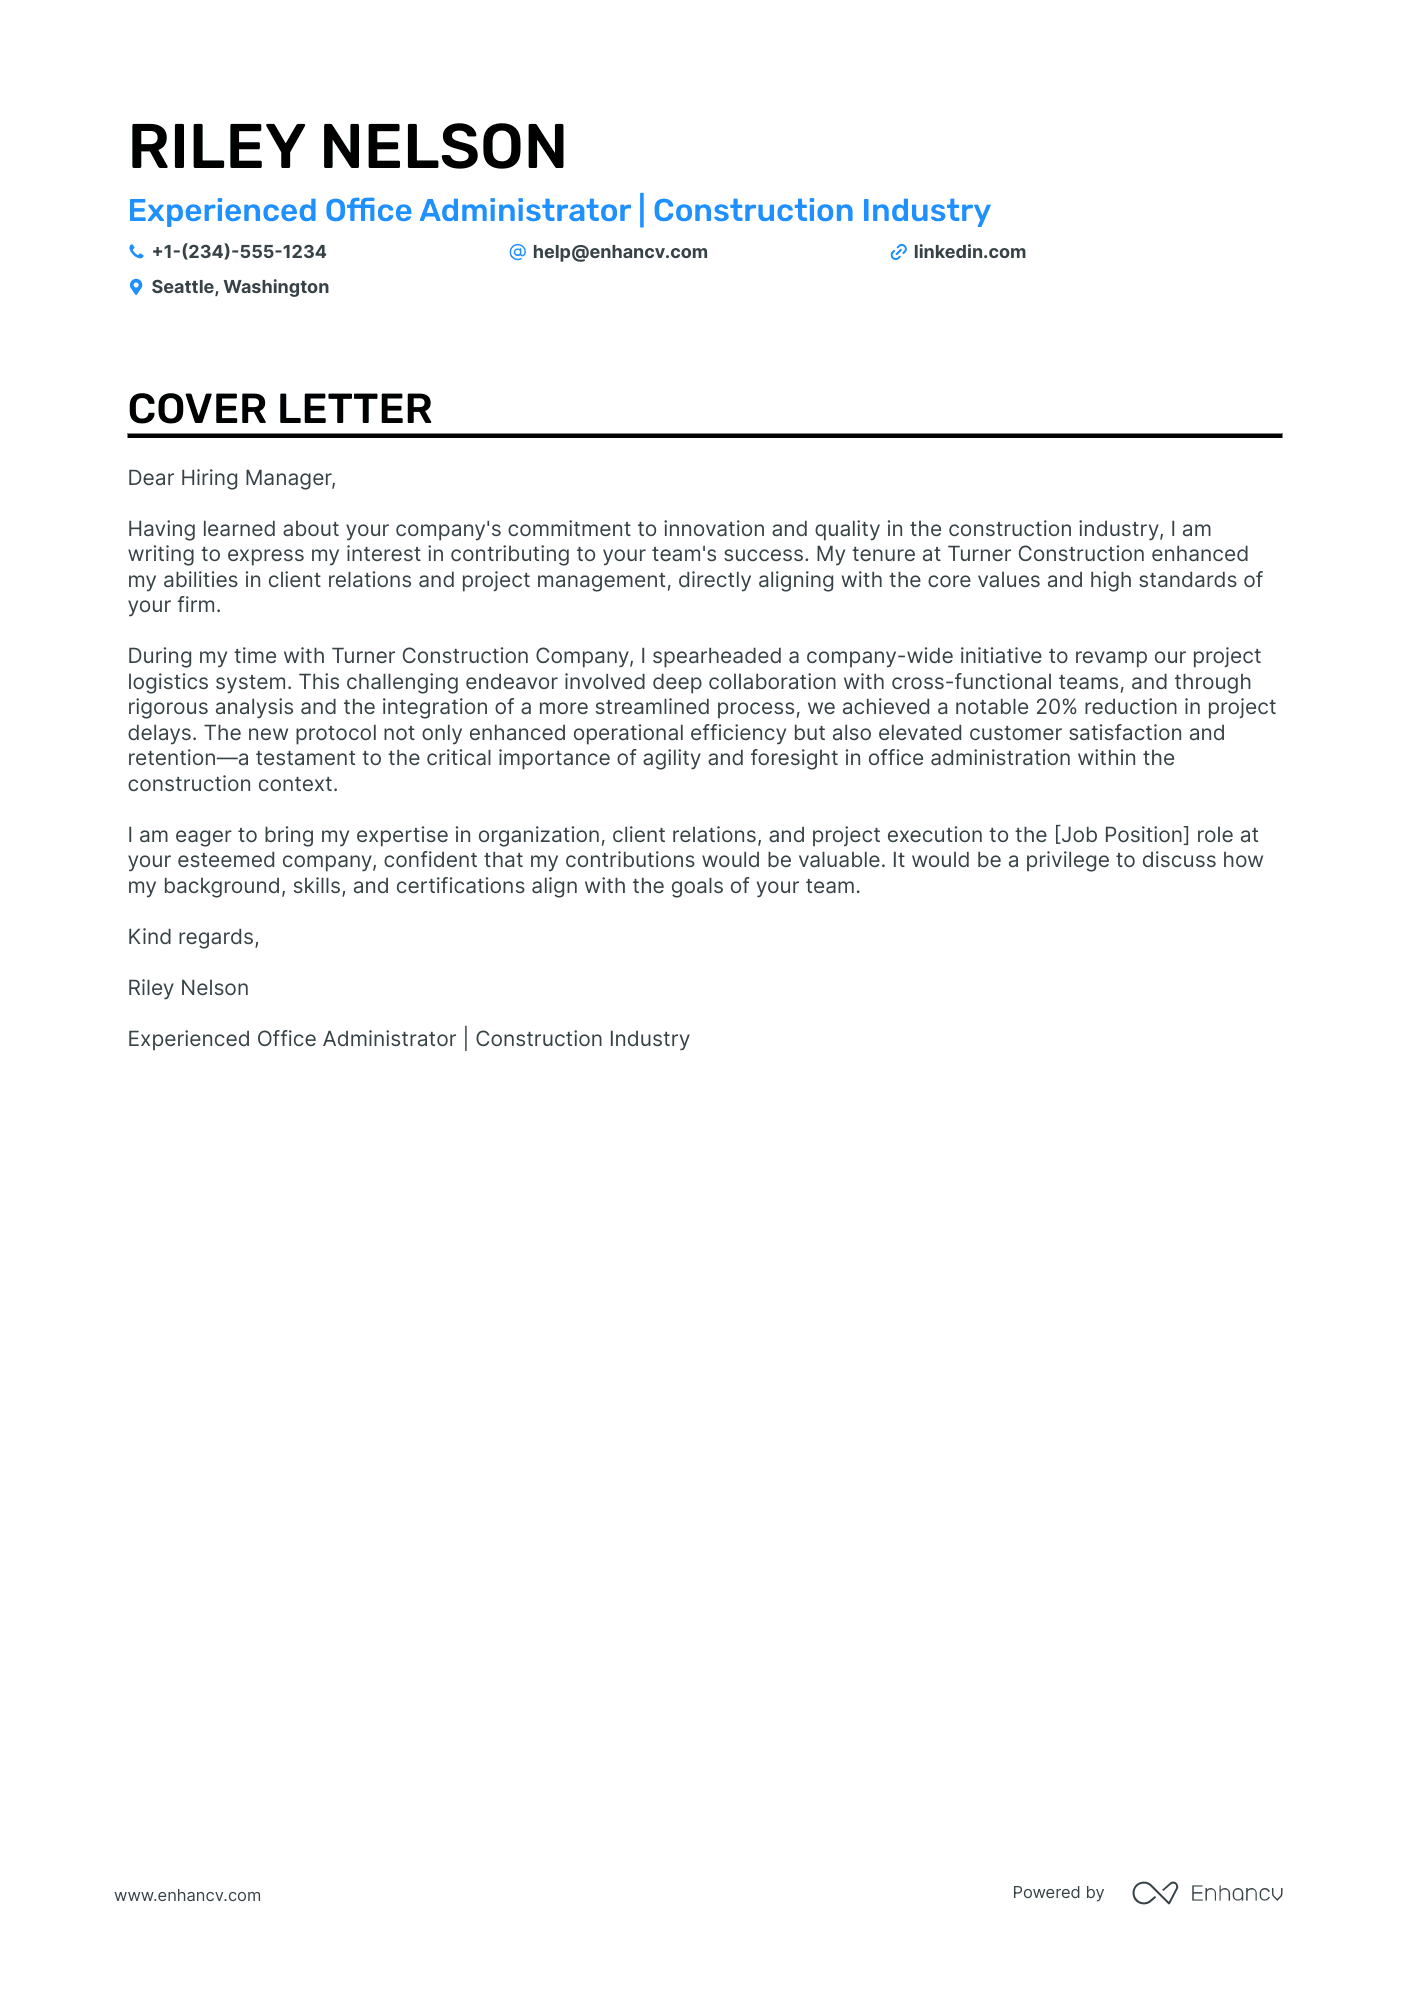 application letter of office administration